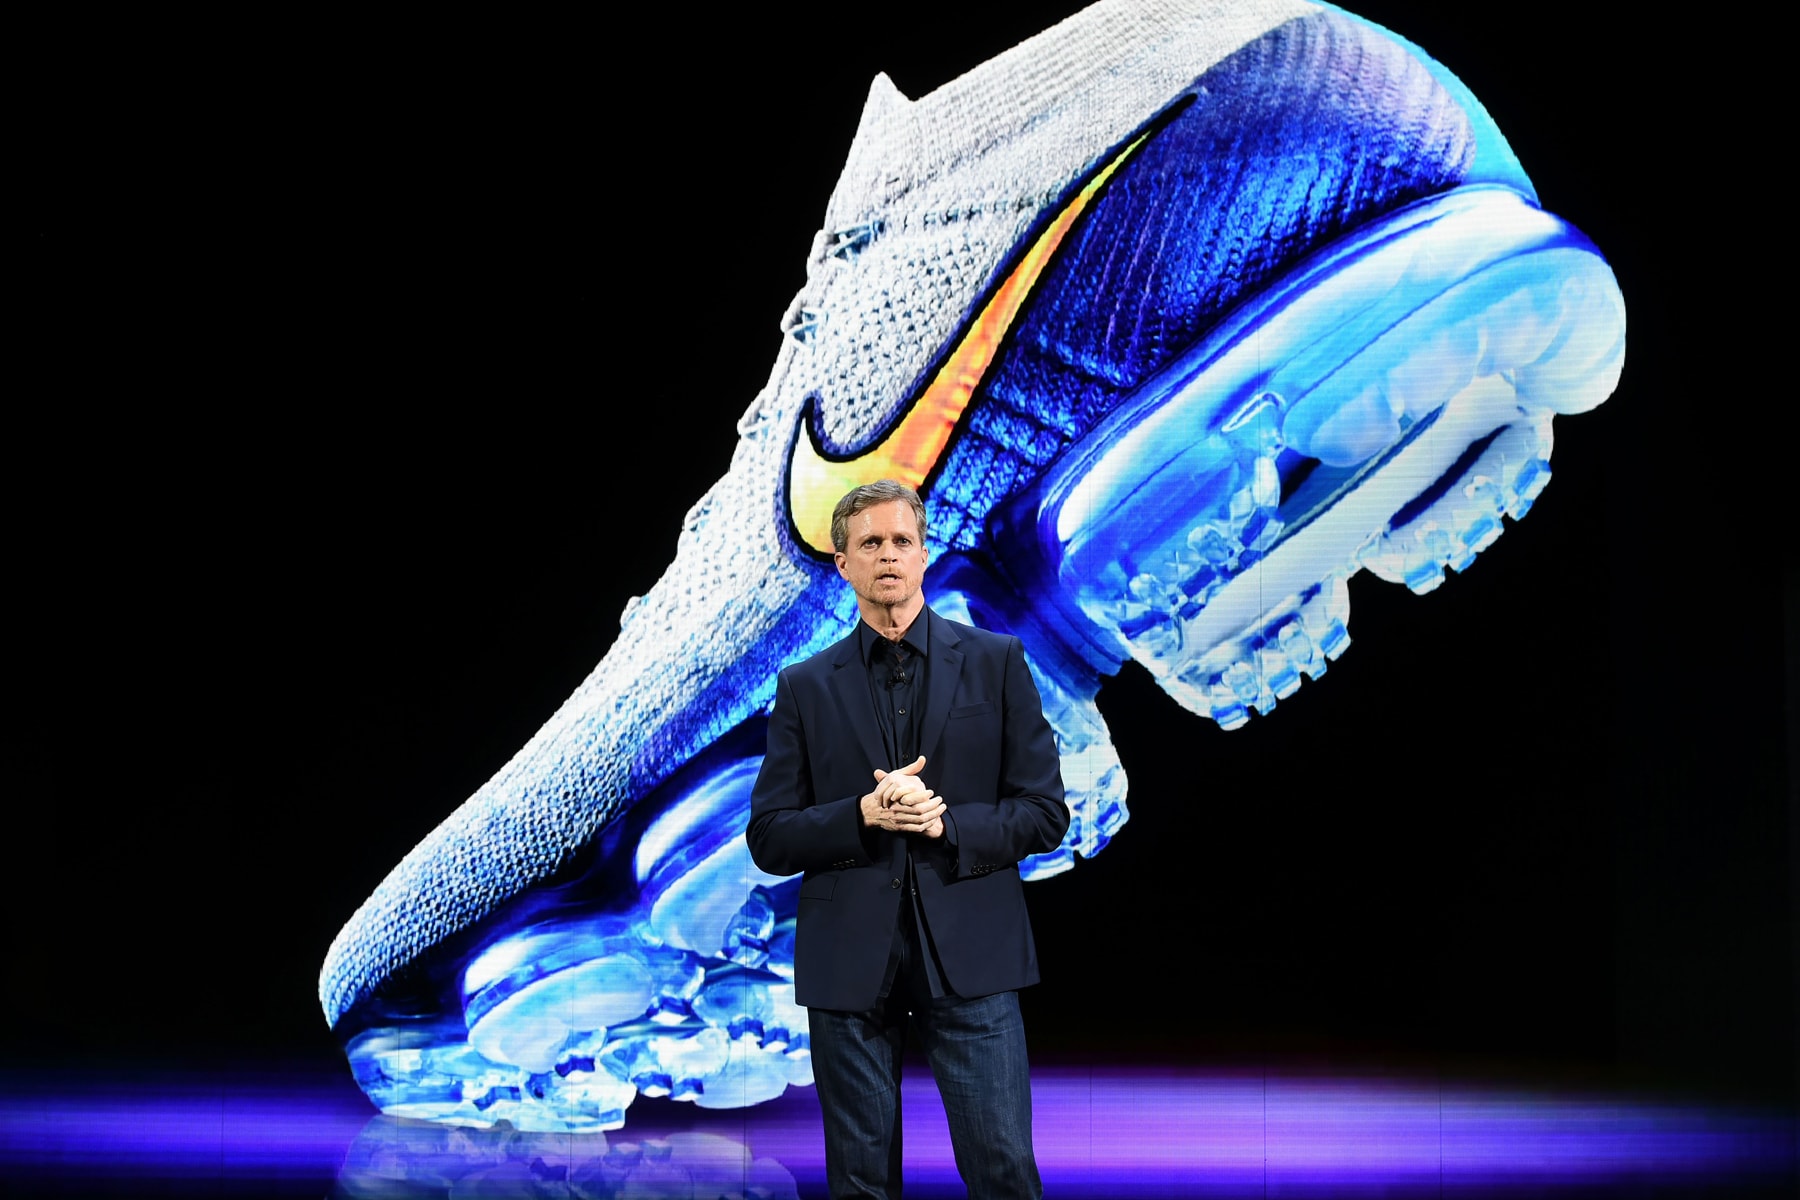 nike investor day 2017 october stock shares market mark park fifty 50 billion 2022 direct to consumer innovation vapormax air sneakers footwear shoes